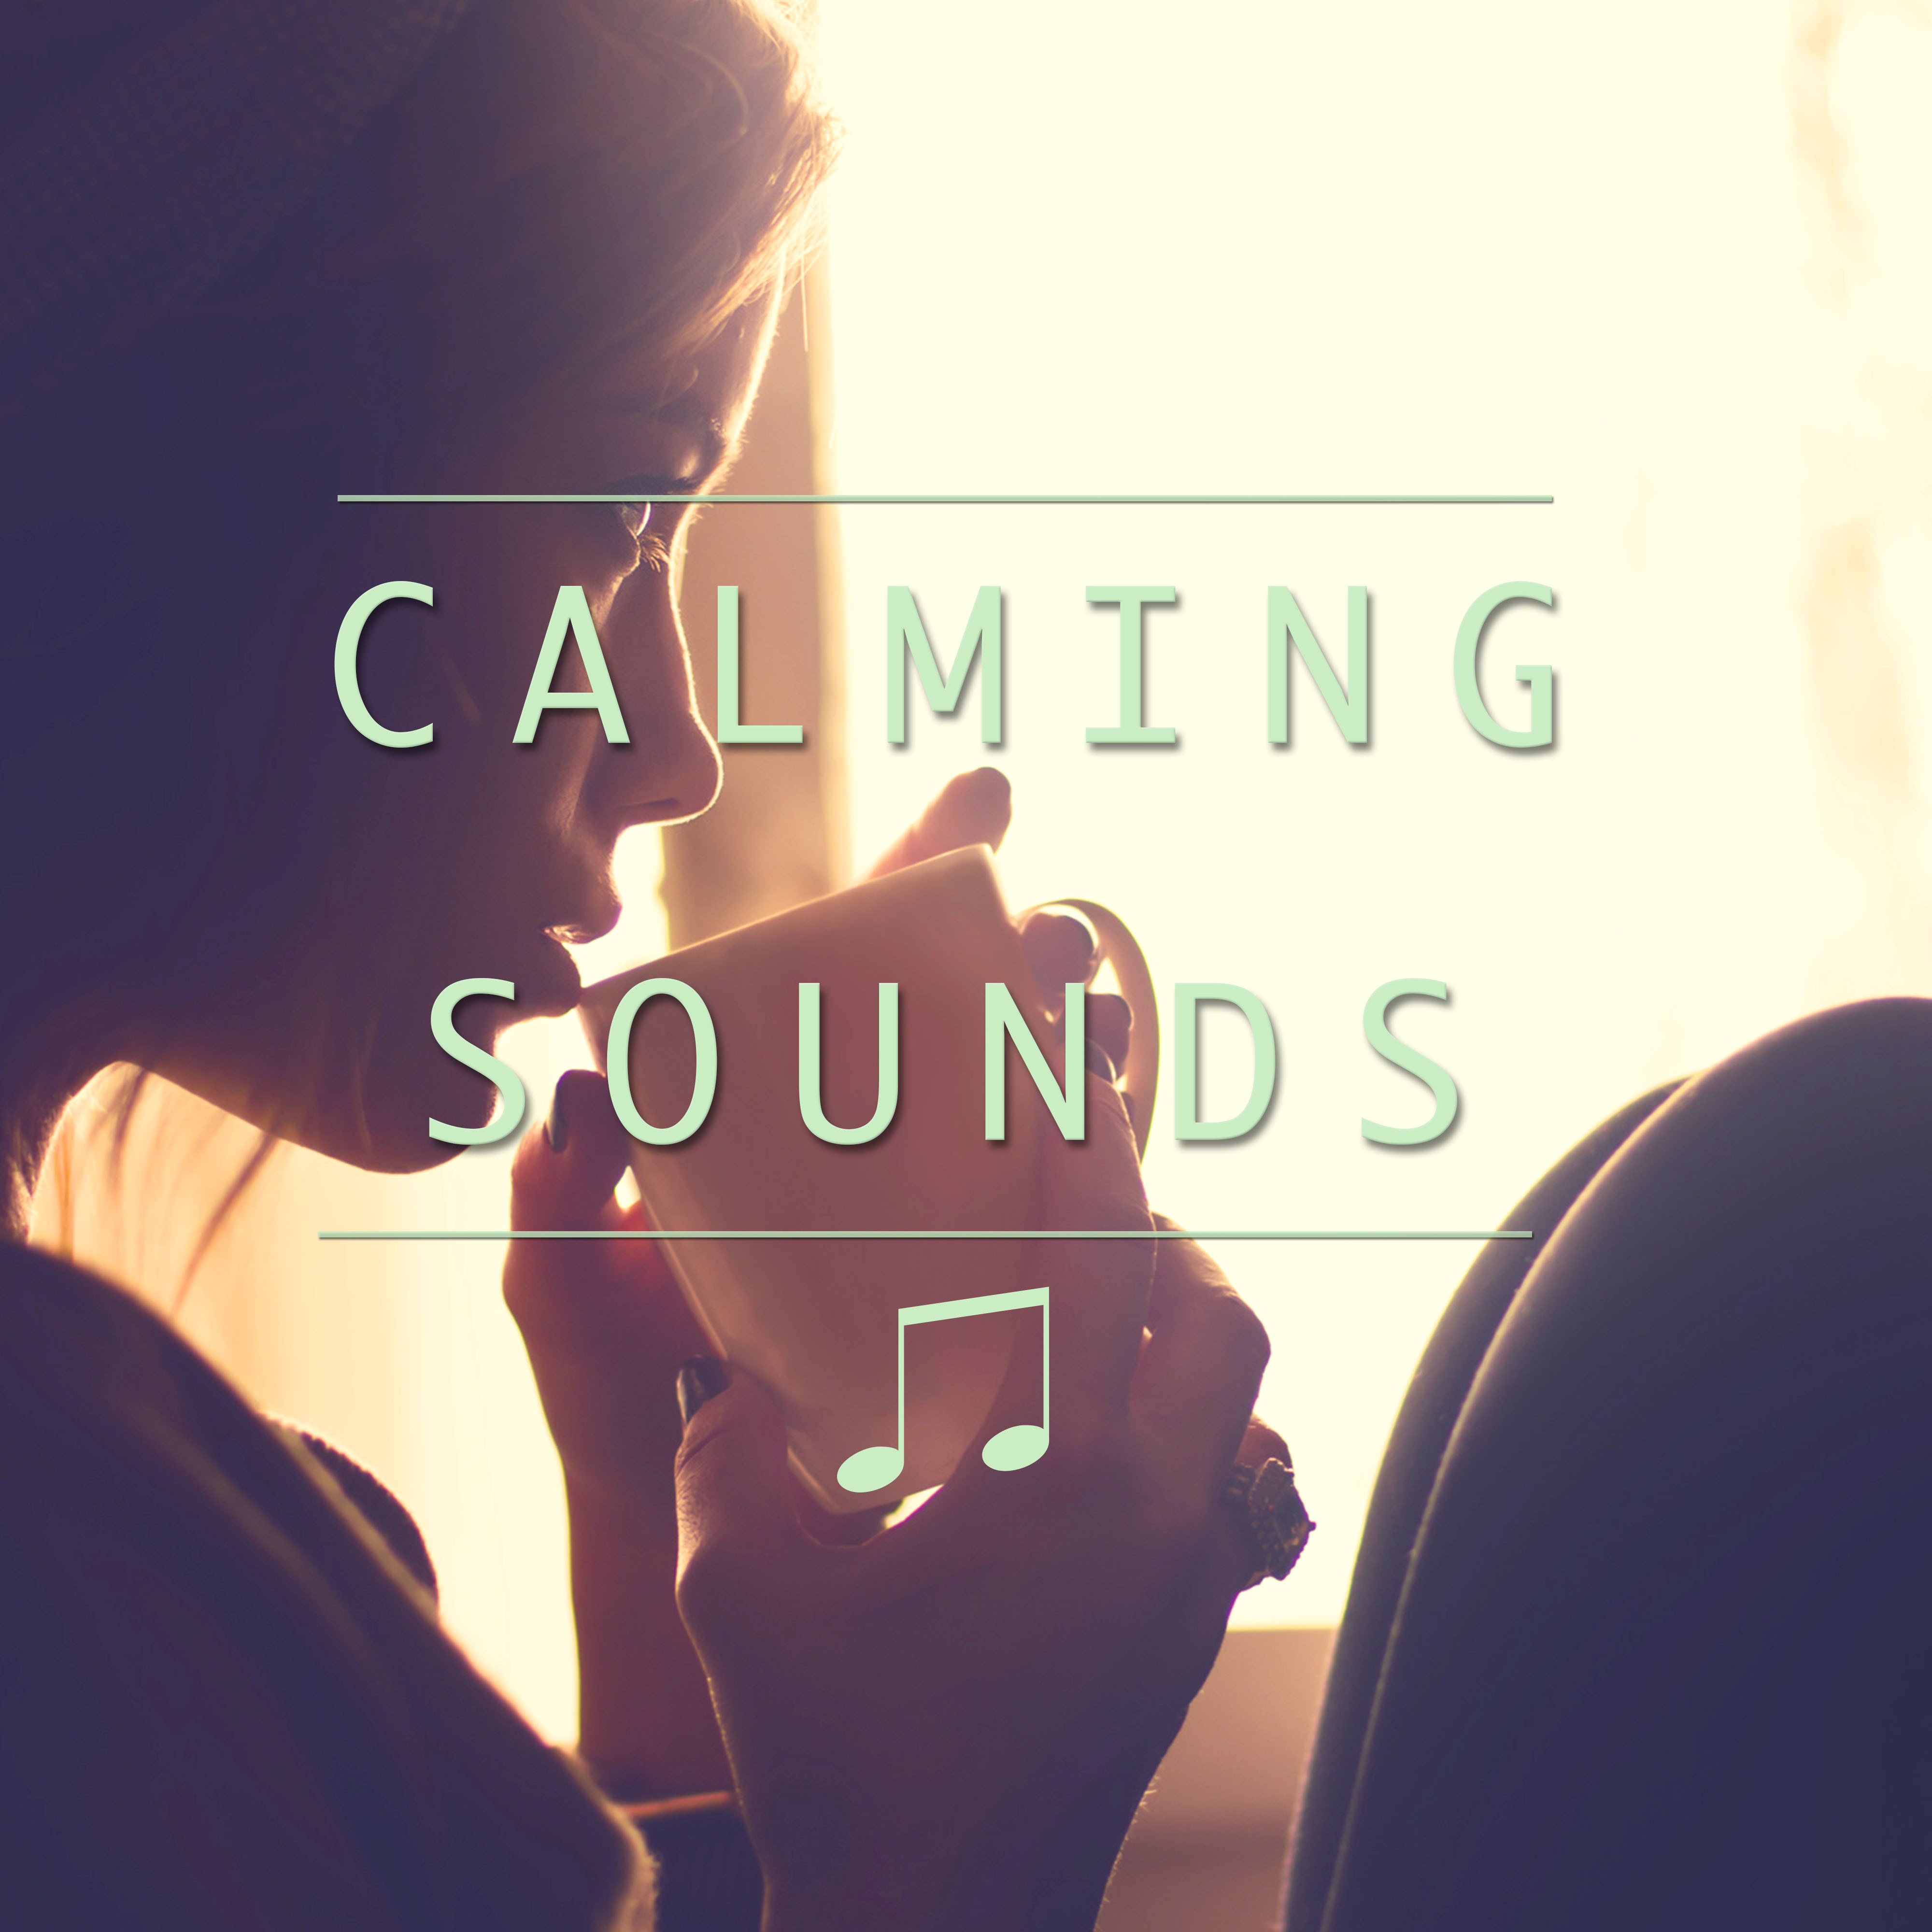 Calming Sounds to Put Mind at Ease